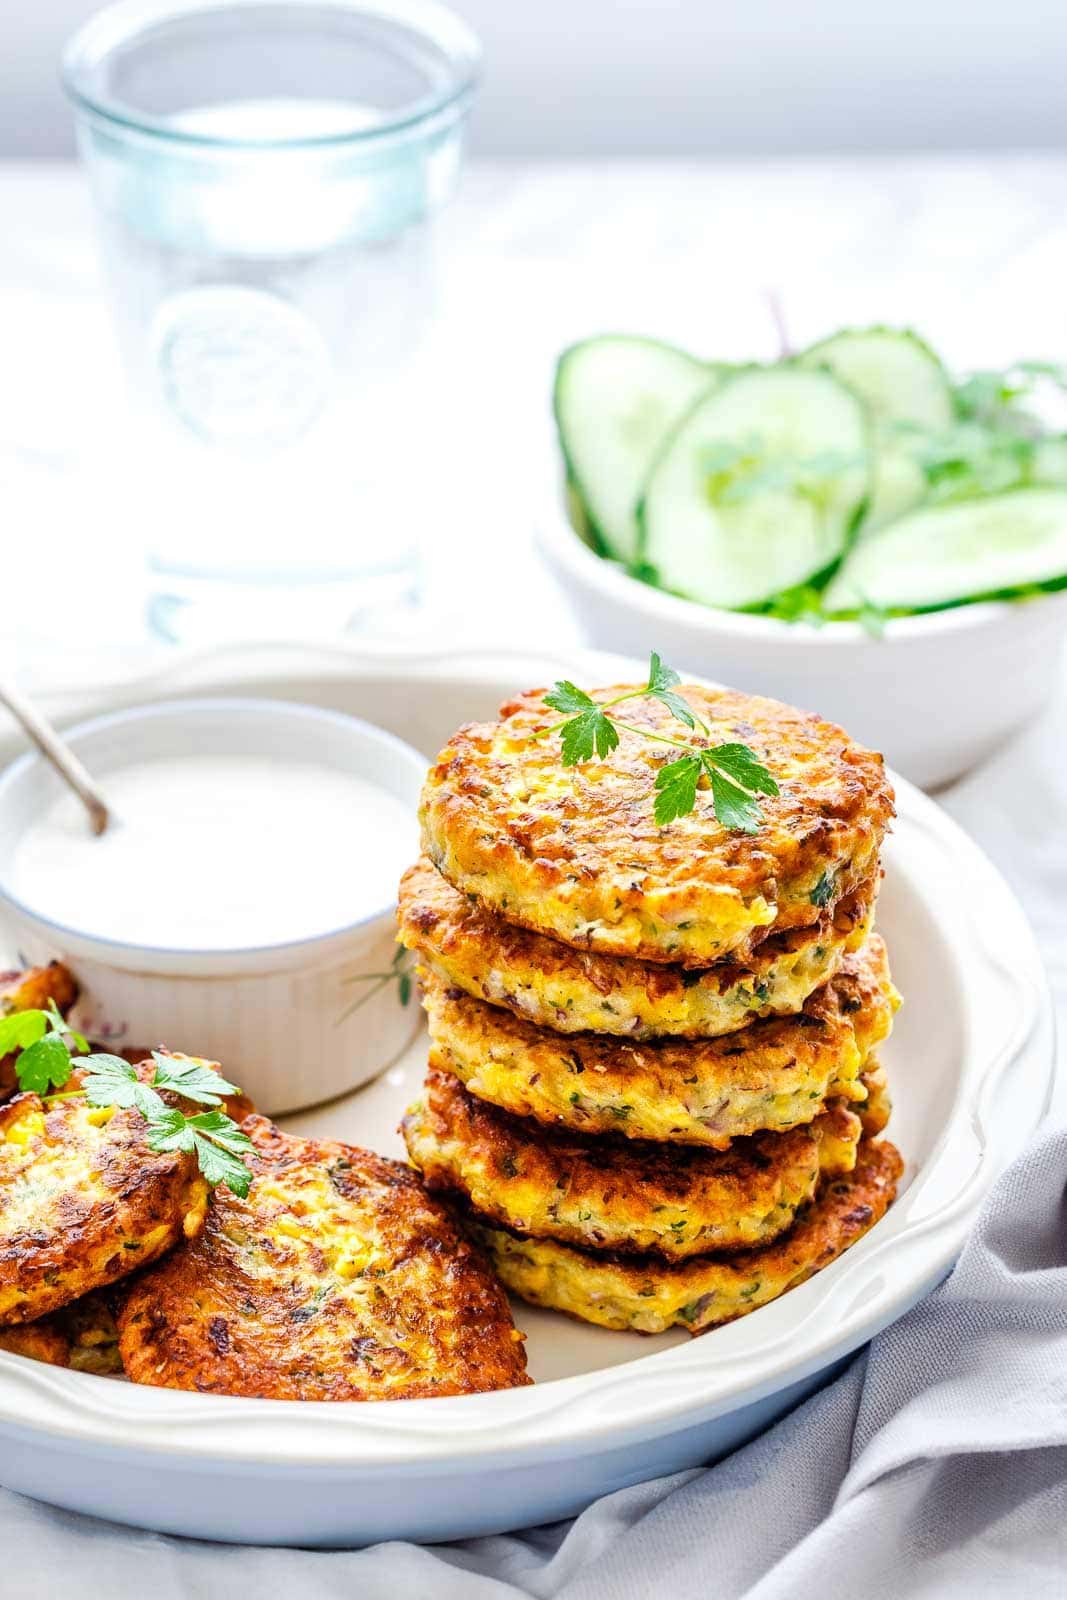 Corn fritters stacked in a white plate, with yogurt sauce on the side